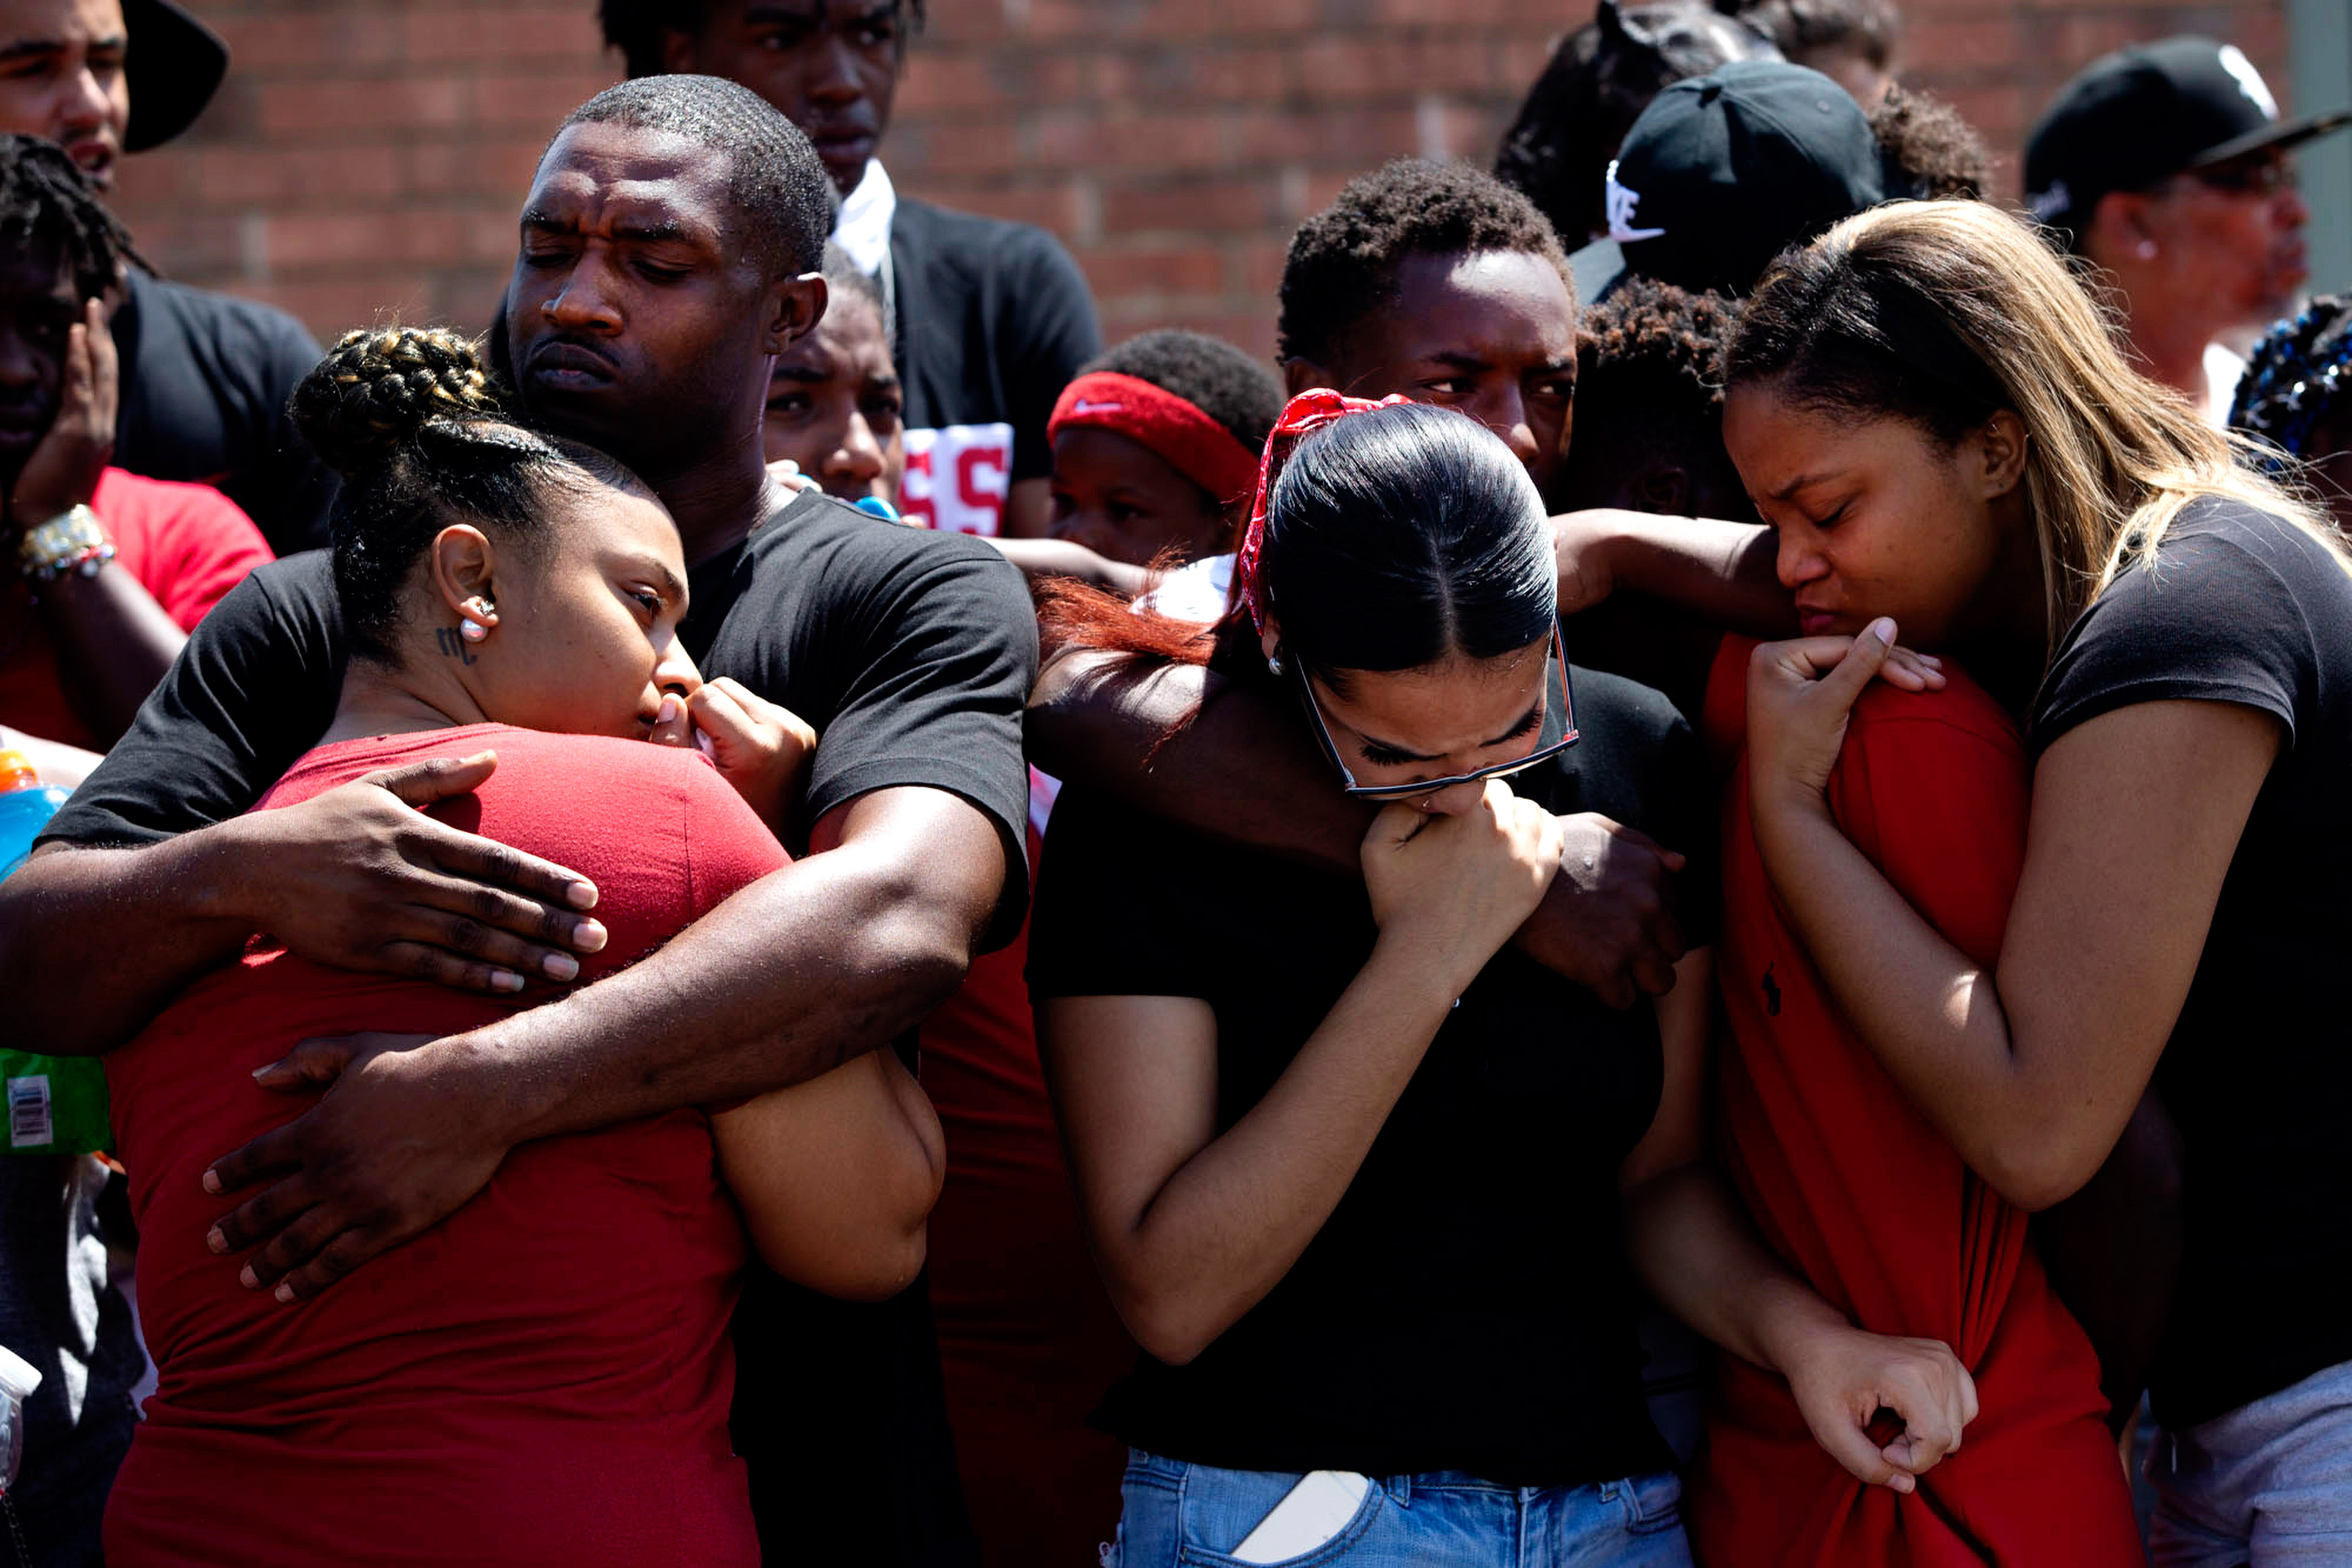 A group of people hold each other in mourning.